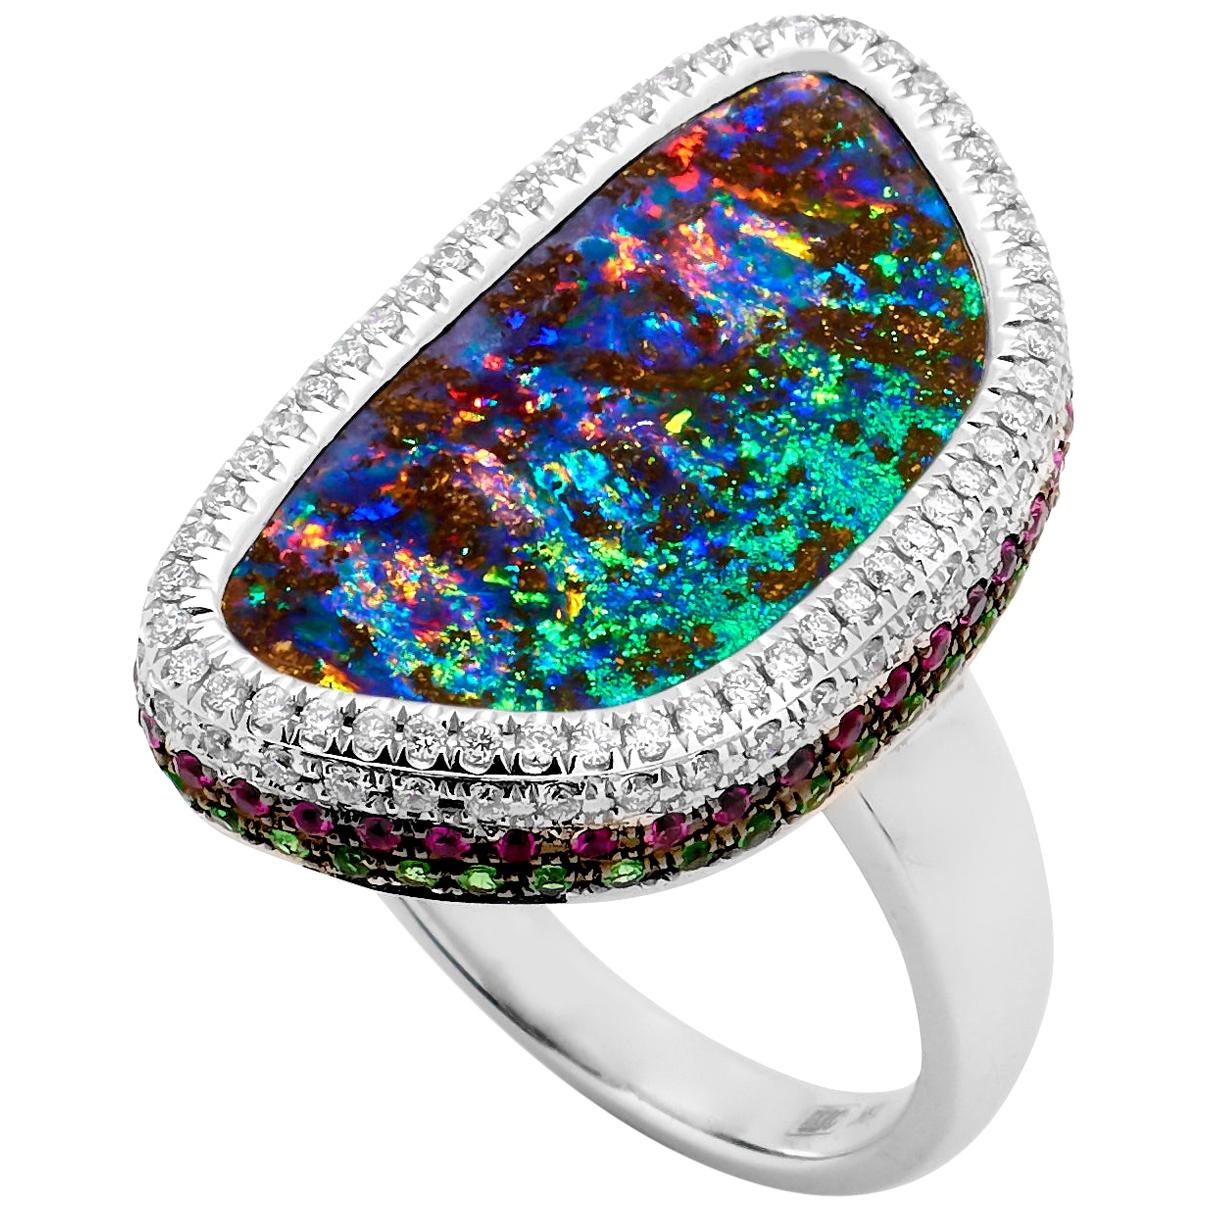 Natural Untreated Australian 10.25ct Boulder Opal Diamond Ring 18K White Gold For Sale